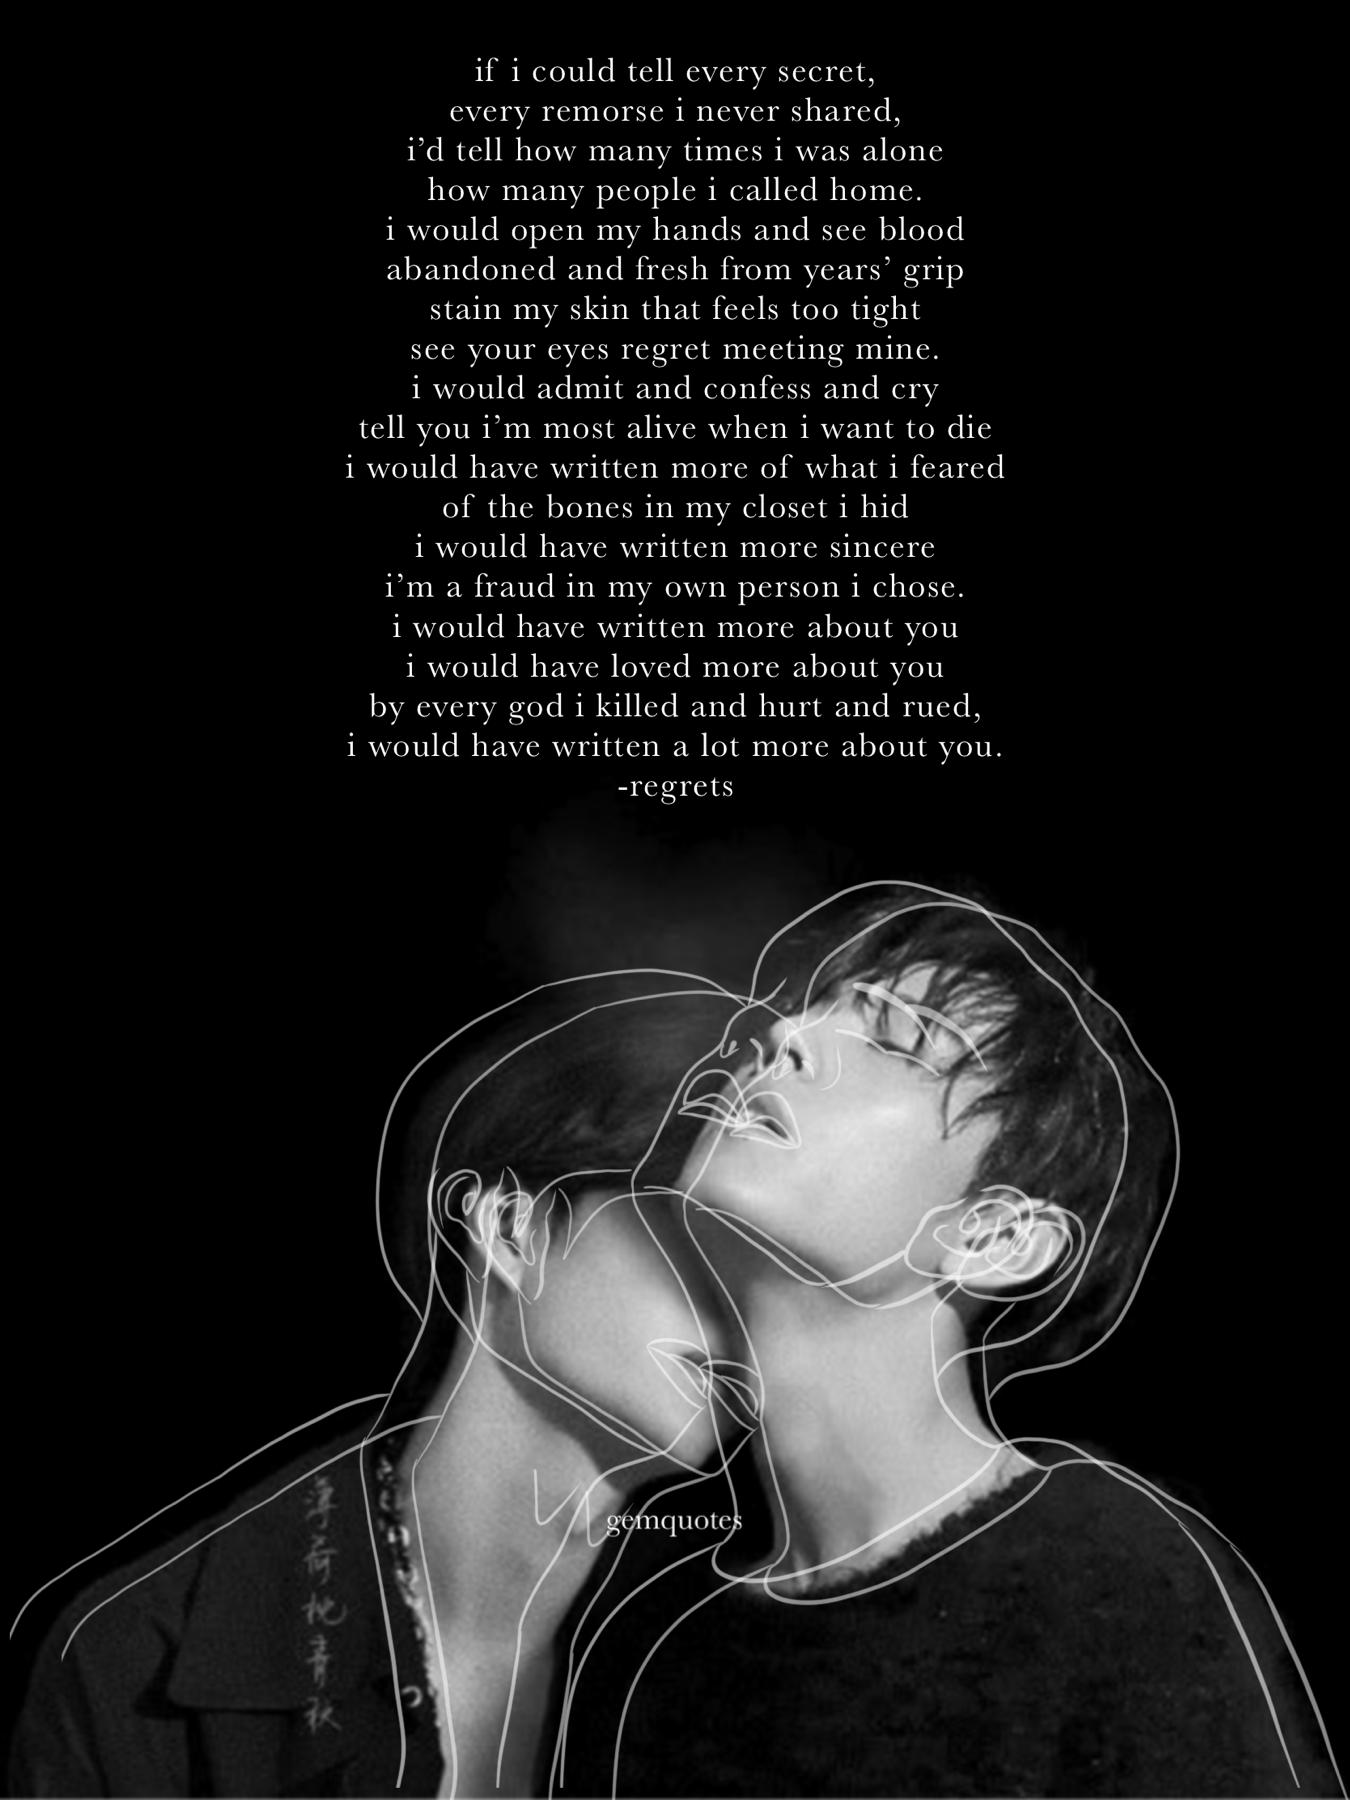 “XtapX”
I didn’t really have the energy to make this a full out collage. And this poem isn’t what i usually write, but i don’t mind the letter-confession style. Do u guys have any regrets?~💎